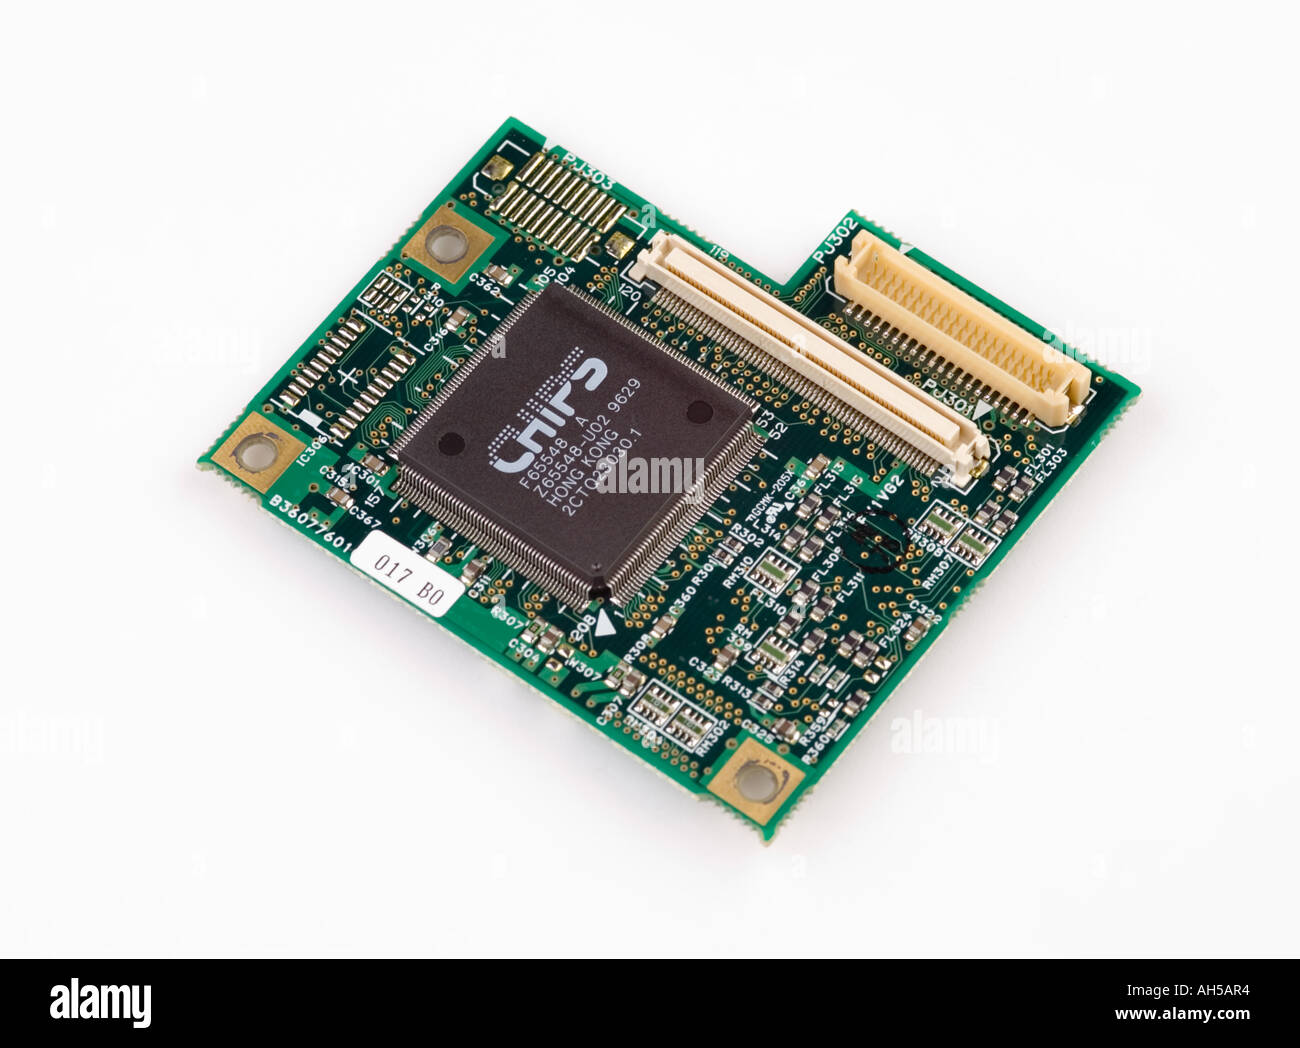 A laptop computer memory circuit board showing various electronic components Stock Photo